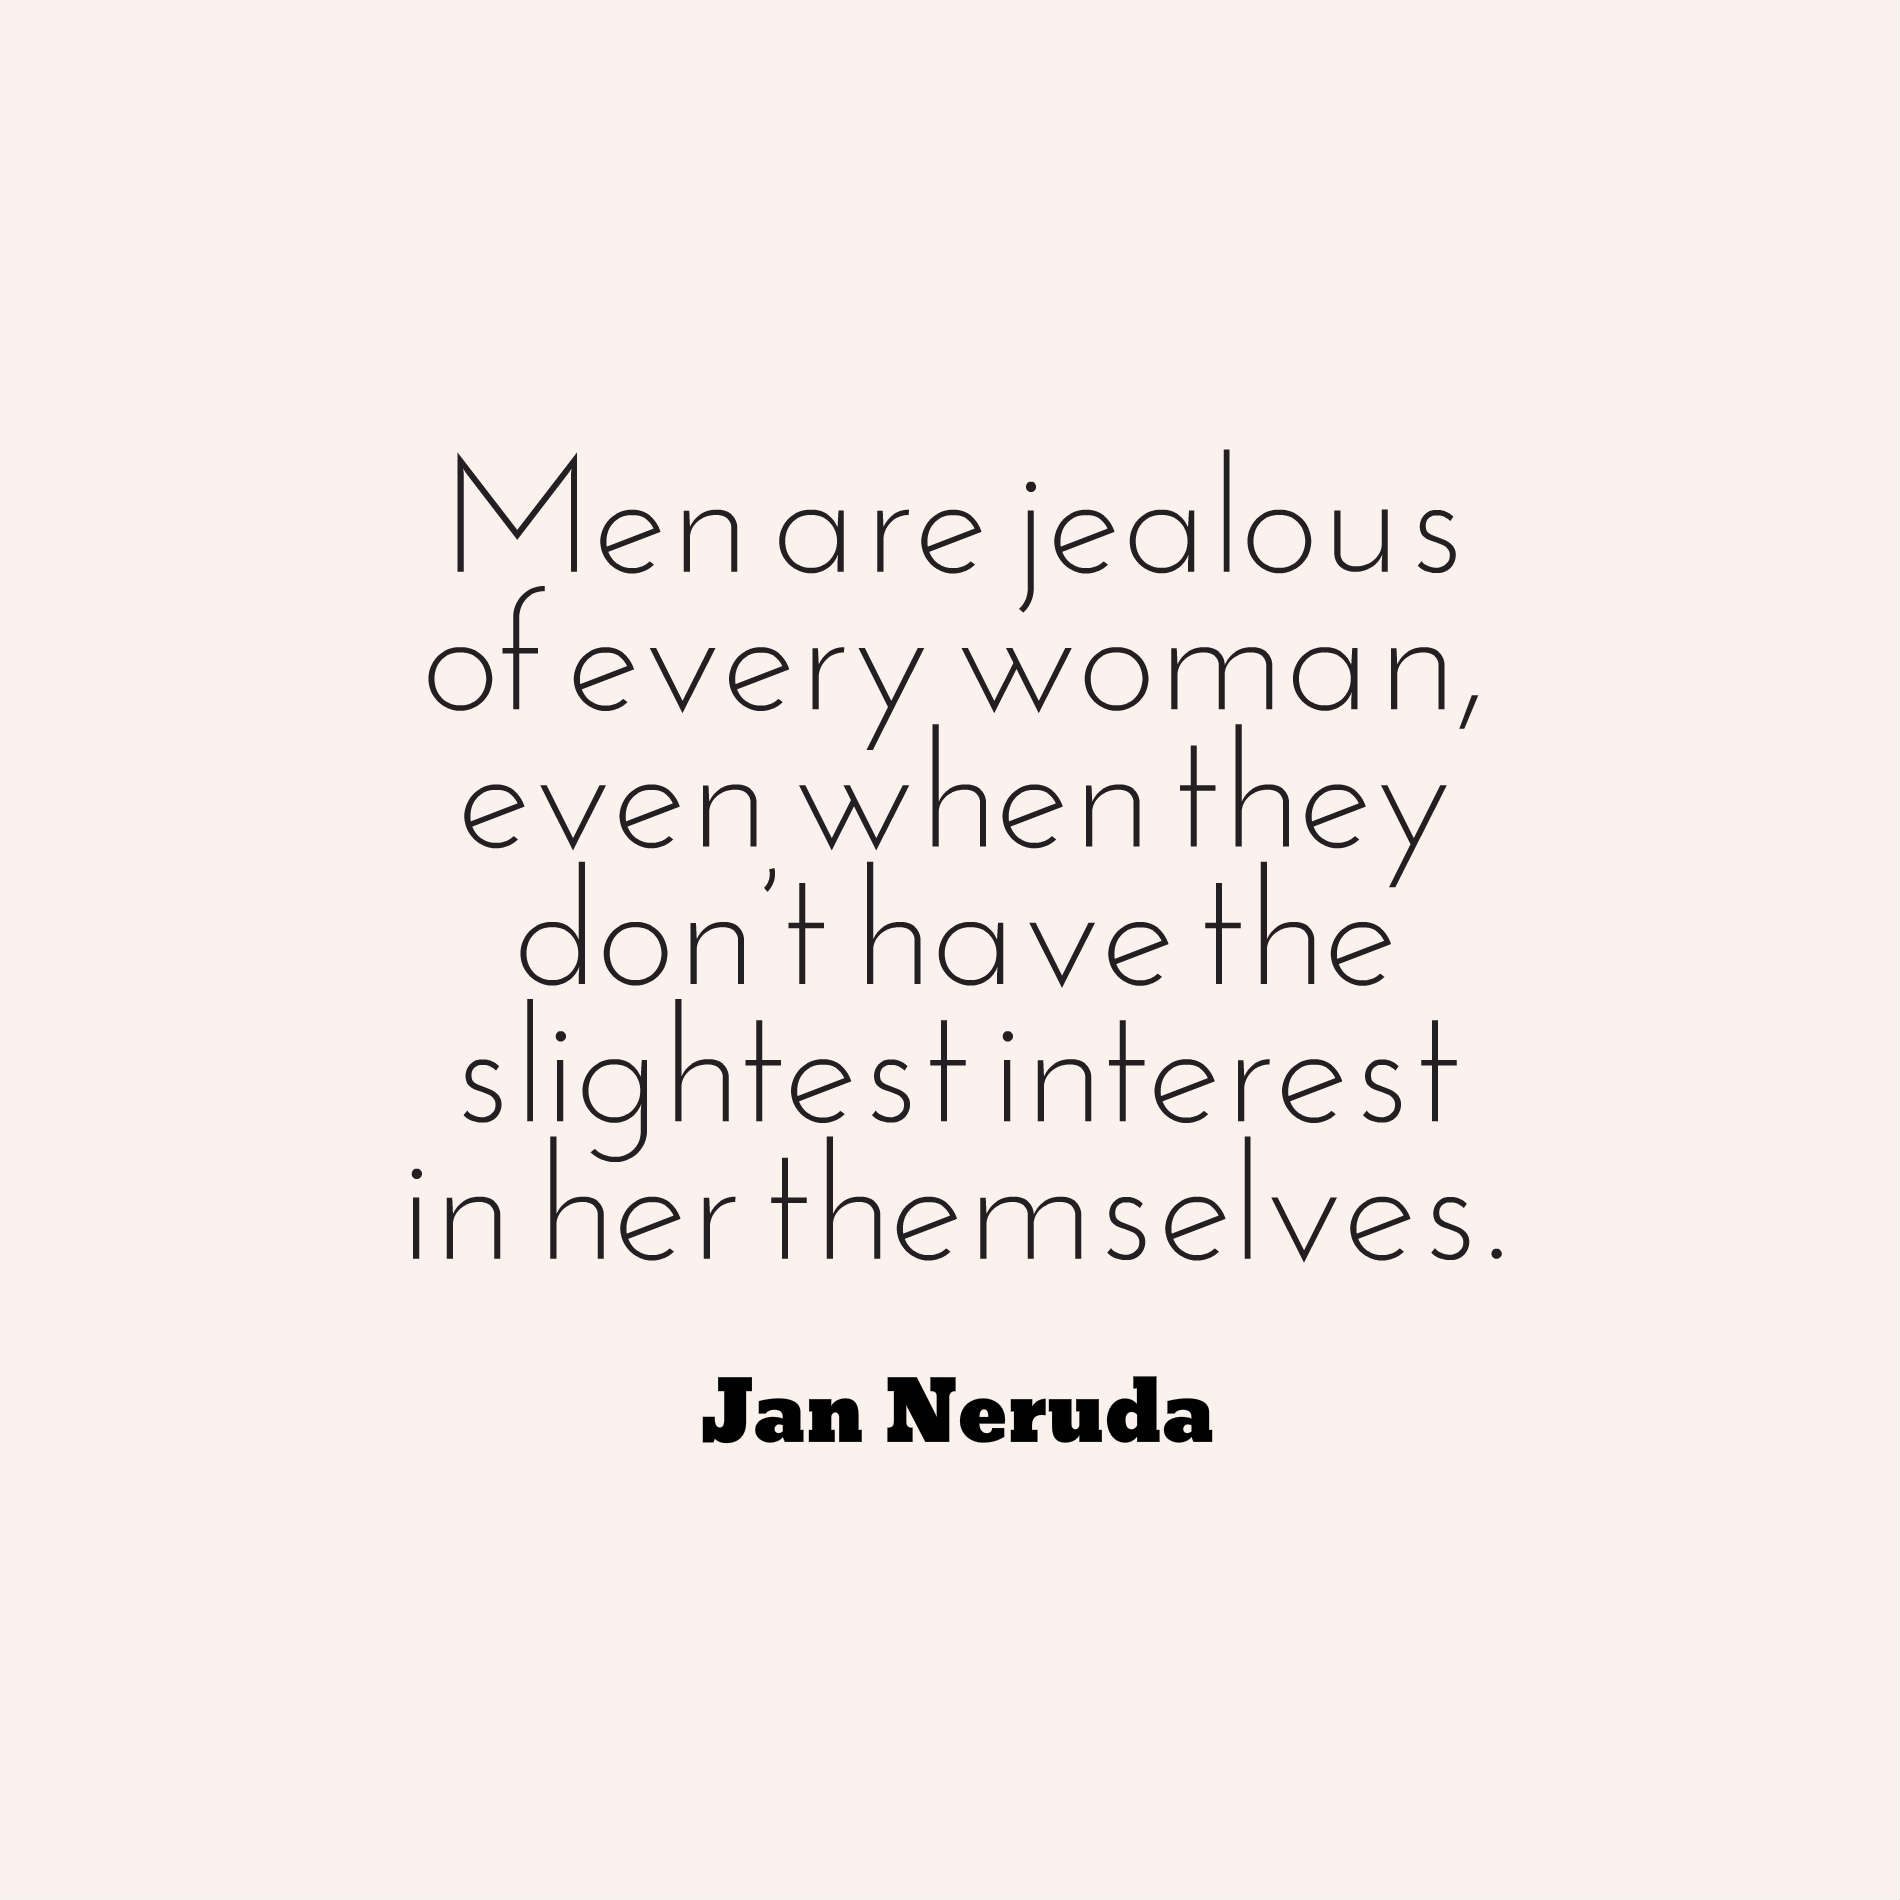 Men are jealous of every woman, even when they don’t have the slightest interest in her themselves.